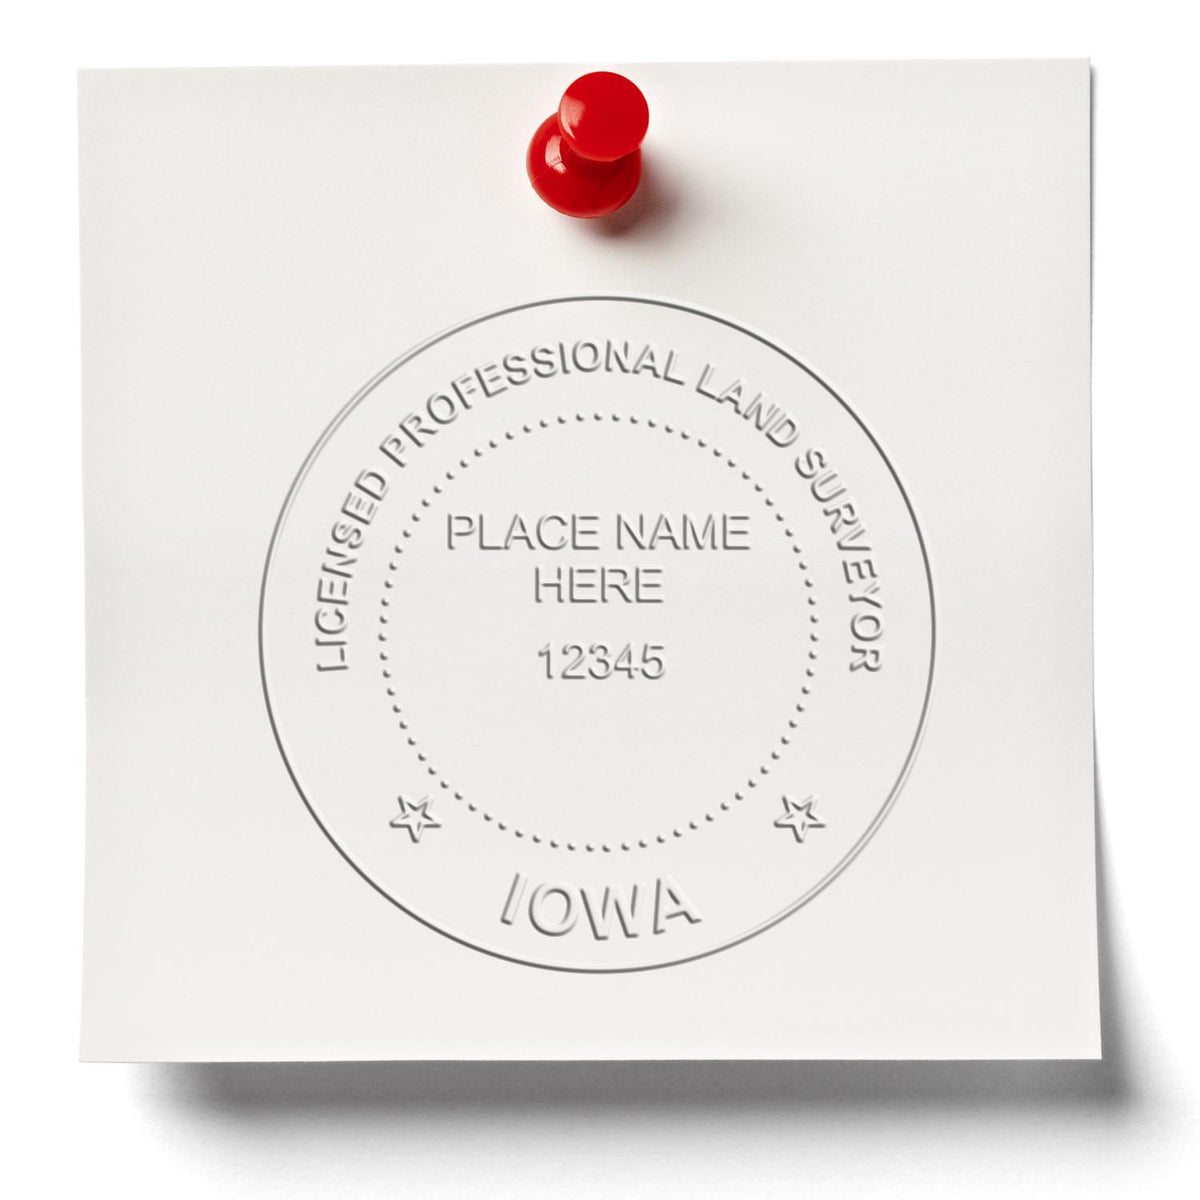 A lifestyle photo showing a stamped image of the State of Iowa Soft Land Surveyor Embossing Seal on a piece of paper